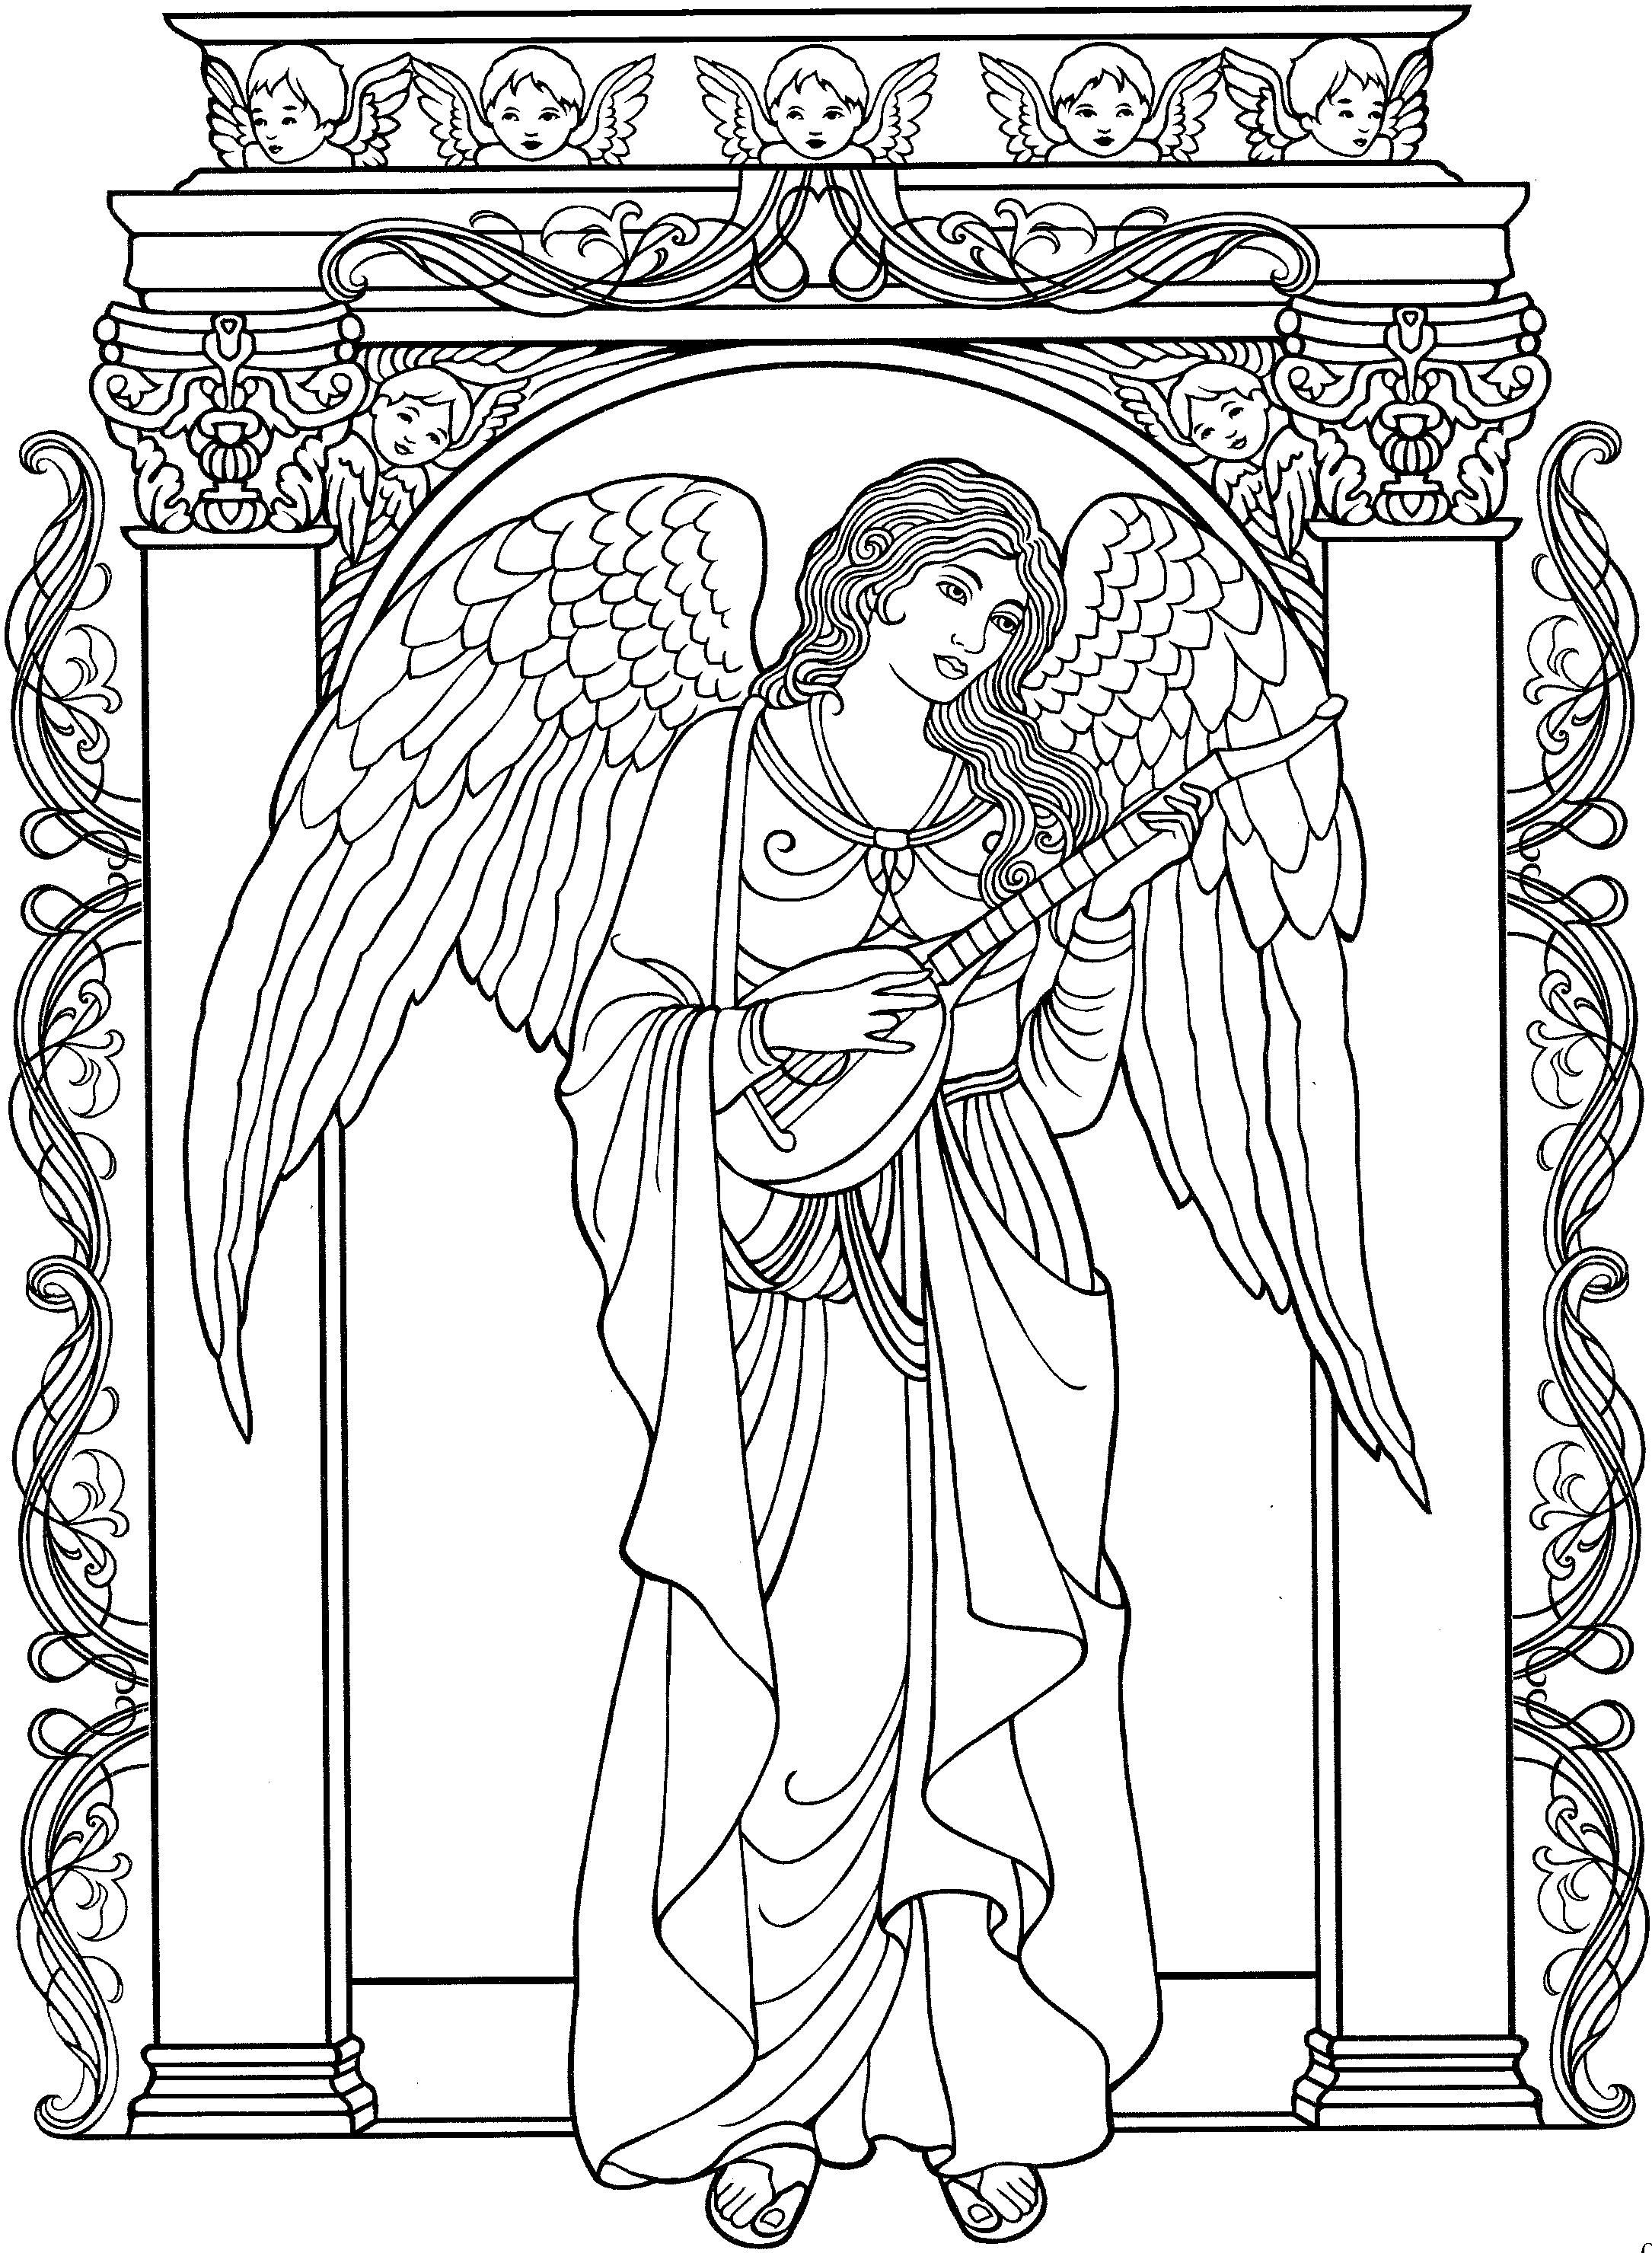 Realistic Angel Coloring Pages At GetColorings Free Printable